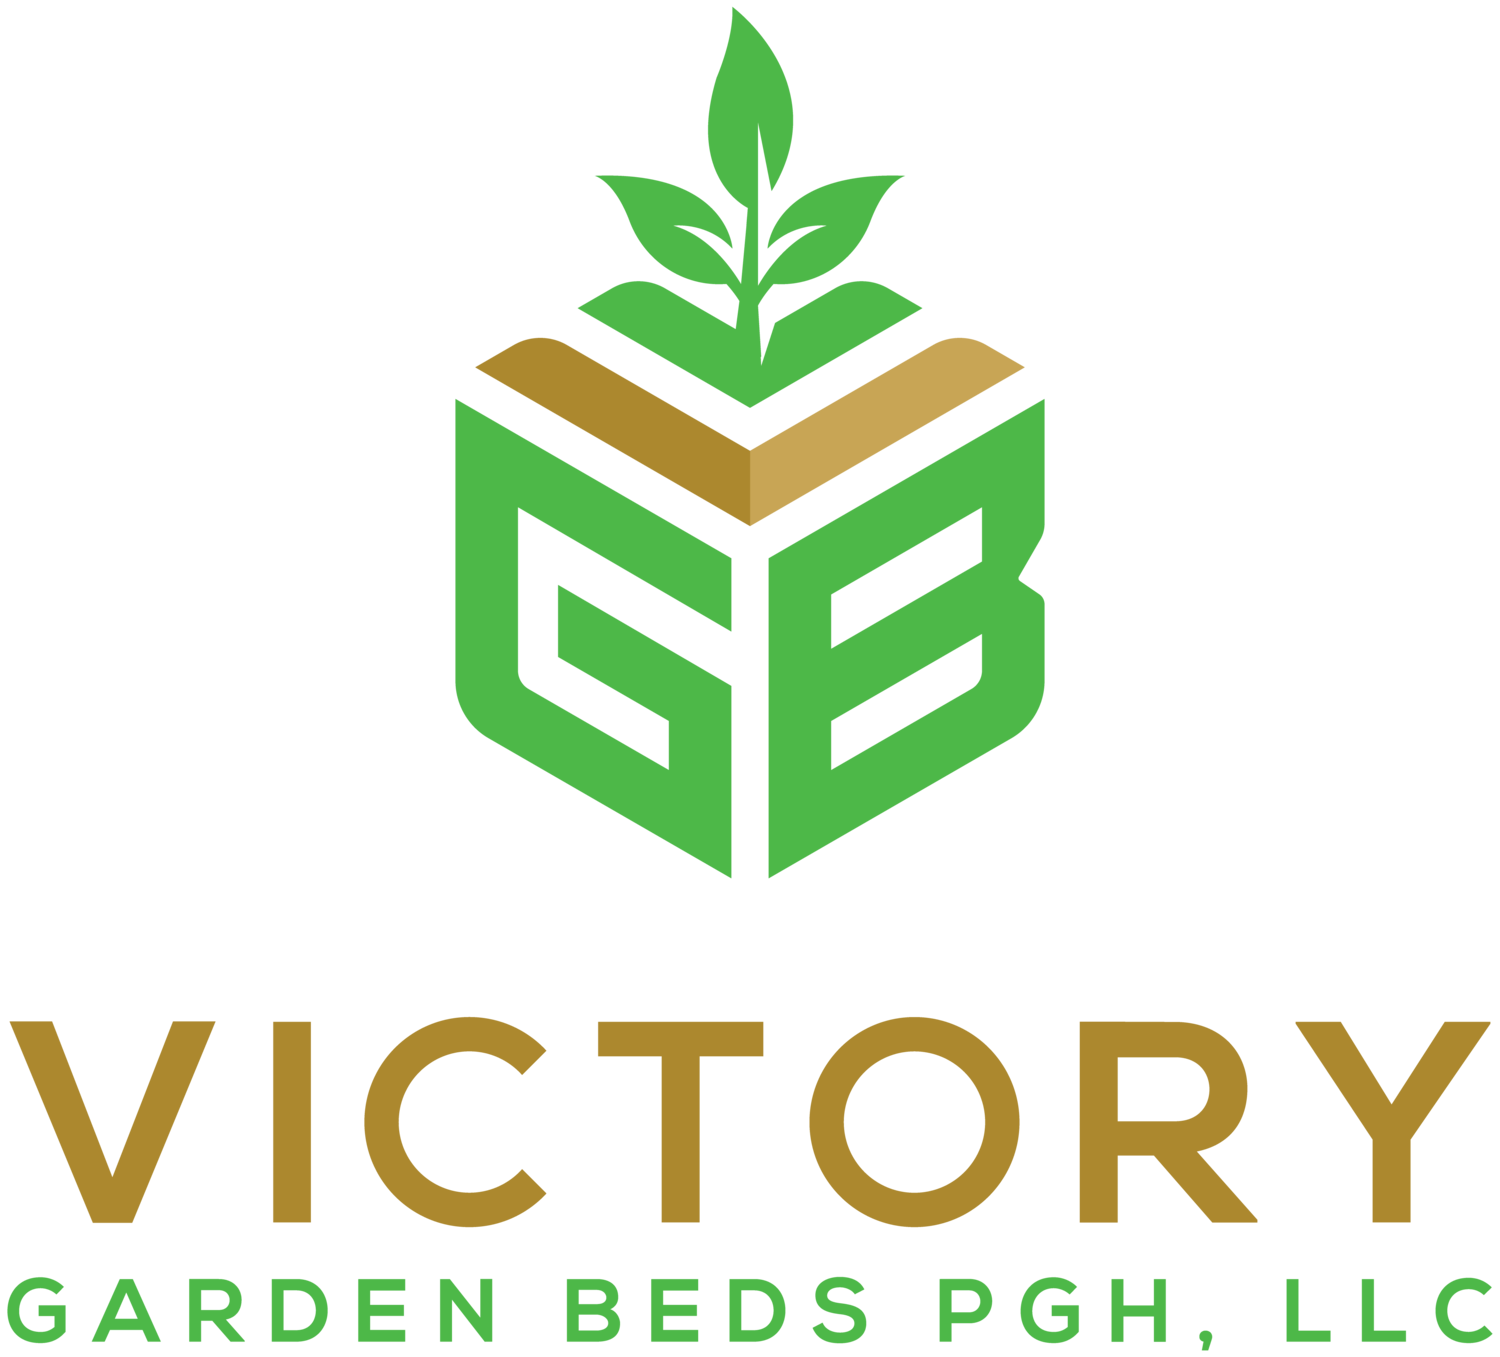 VICTORY GARDEN BEDS PGH